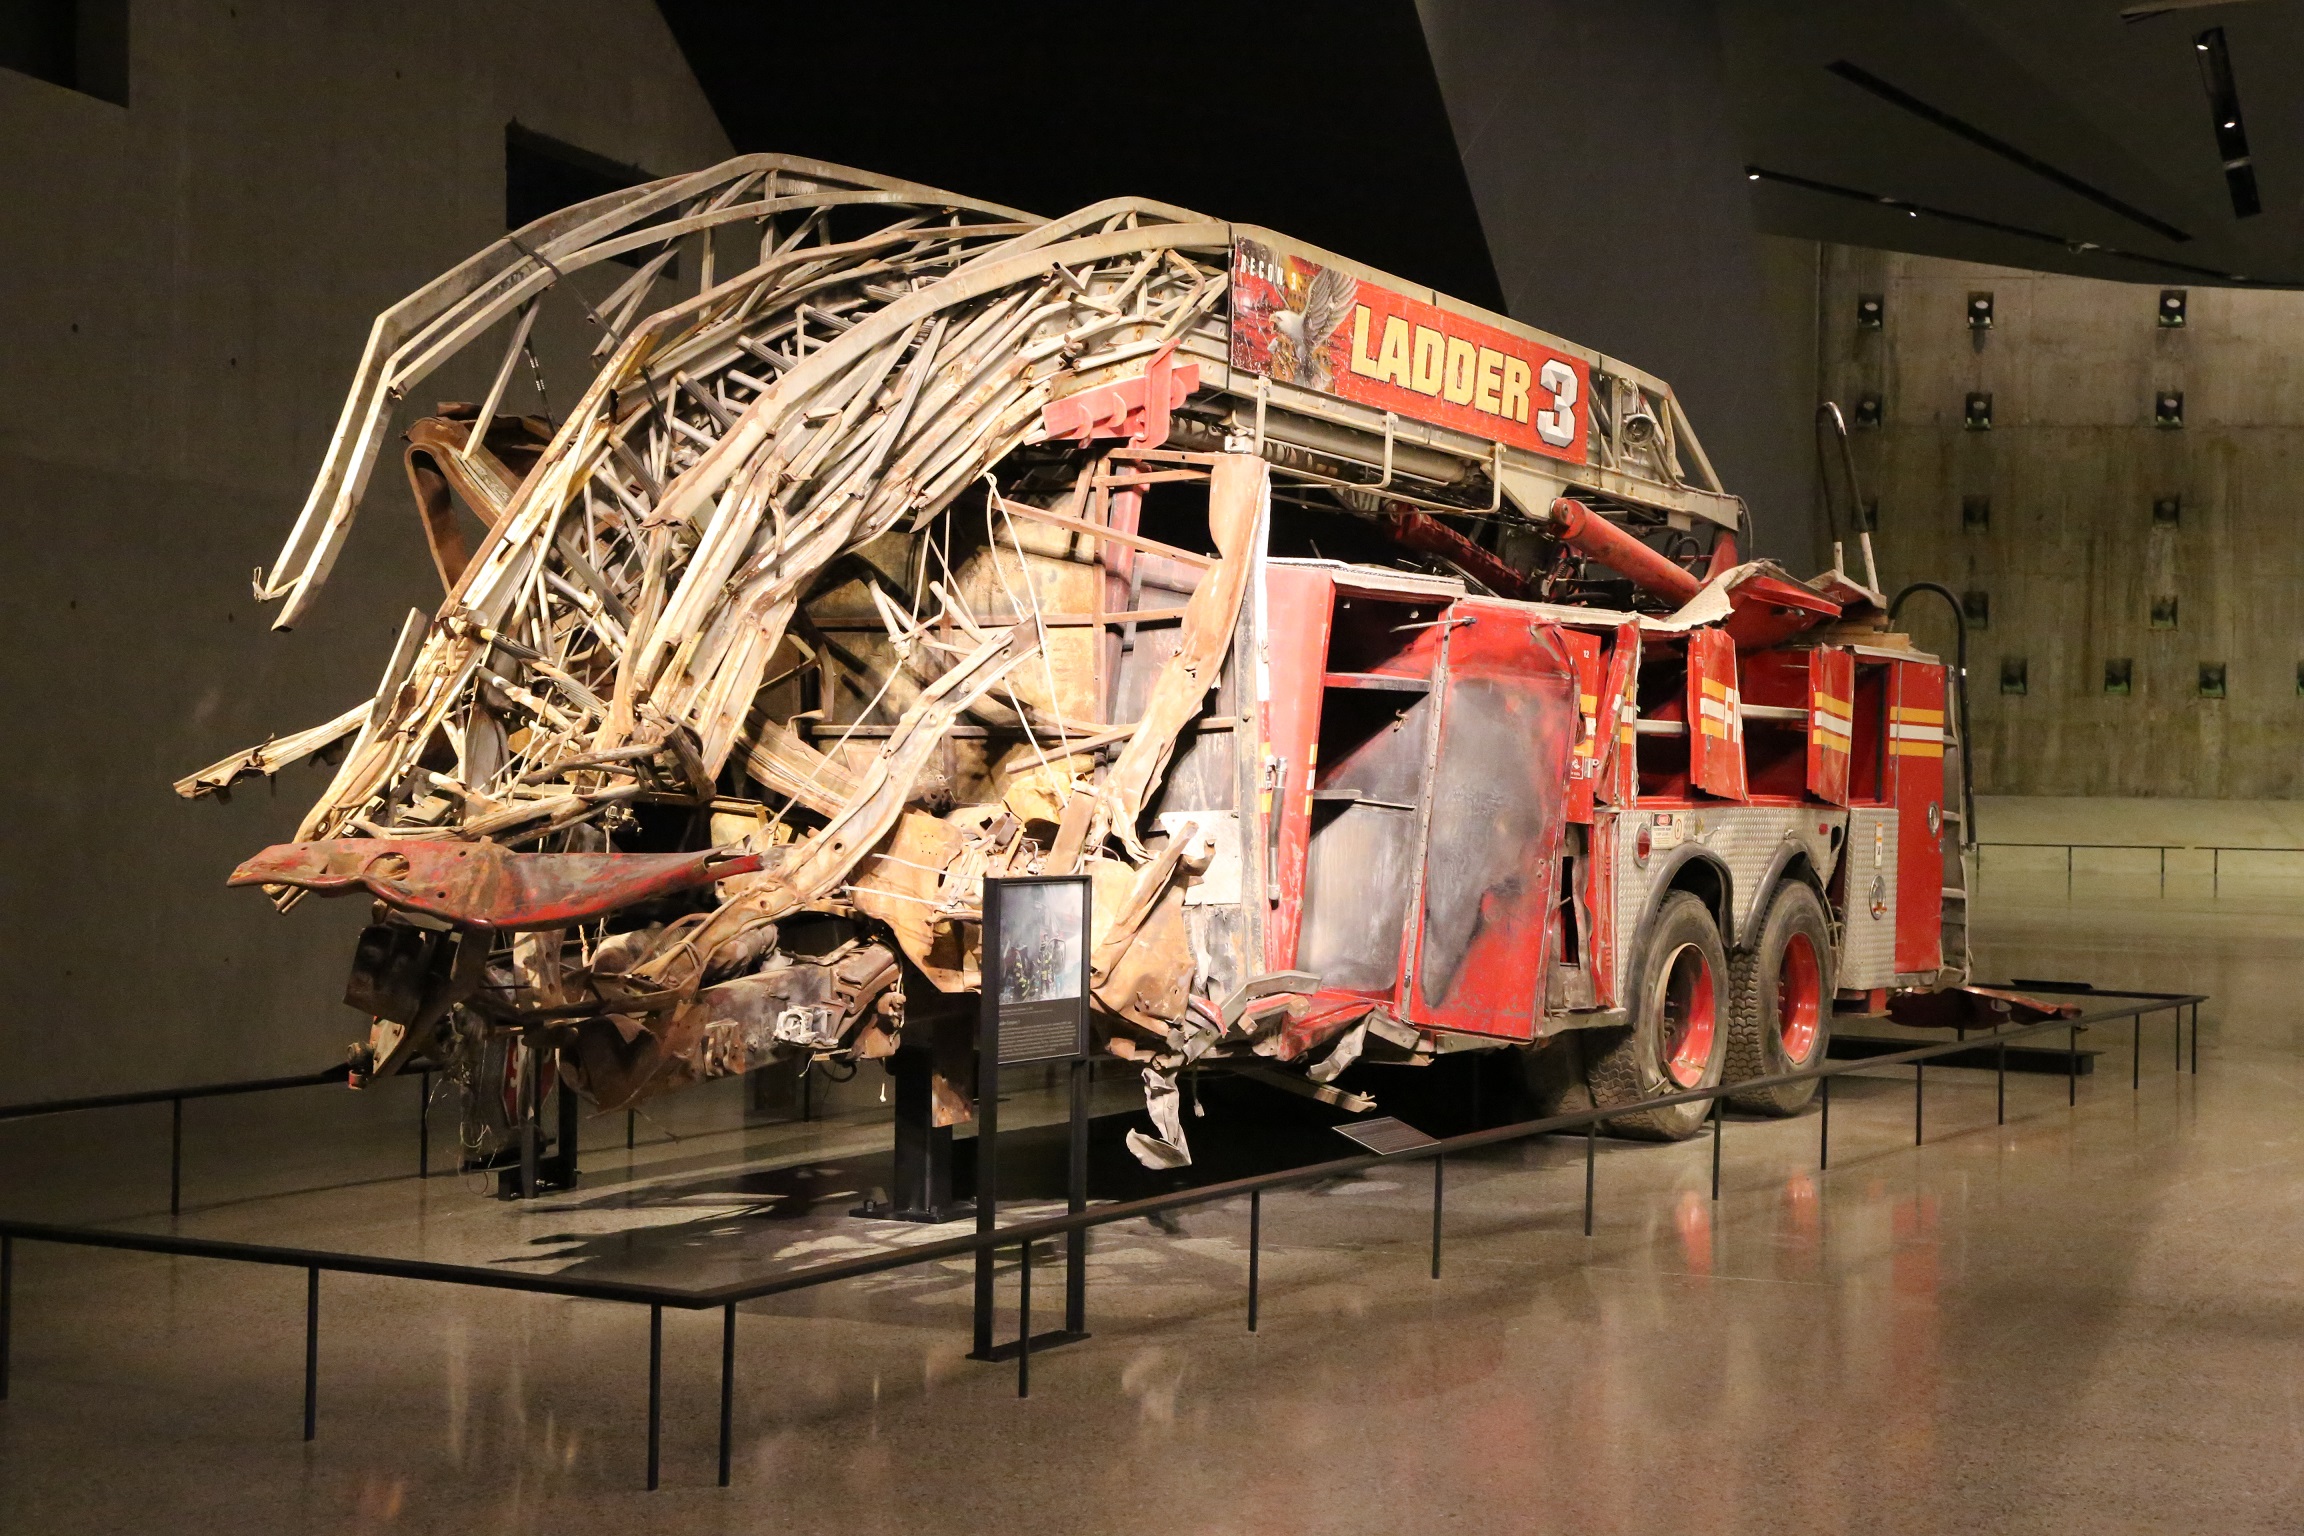 The heavily damaged truck of FDNY Ladder Company 3 stands in the Museum’s Foundation Hall. The front of the truck is completely gone and much of what remains is twisted hunks of metal.